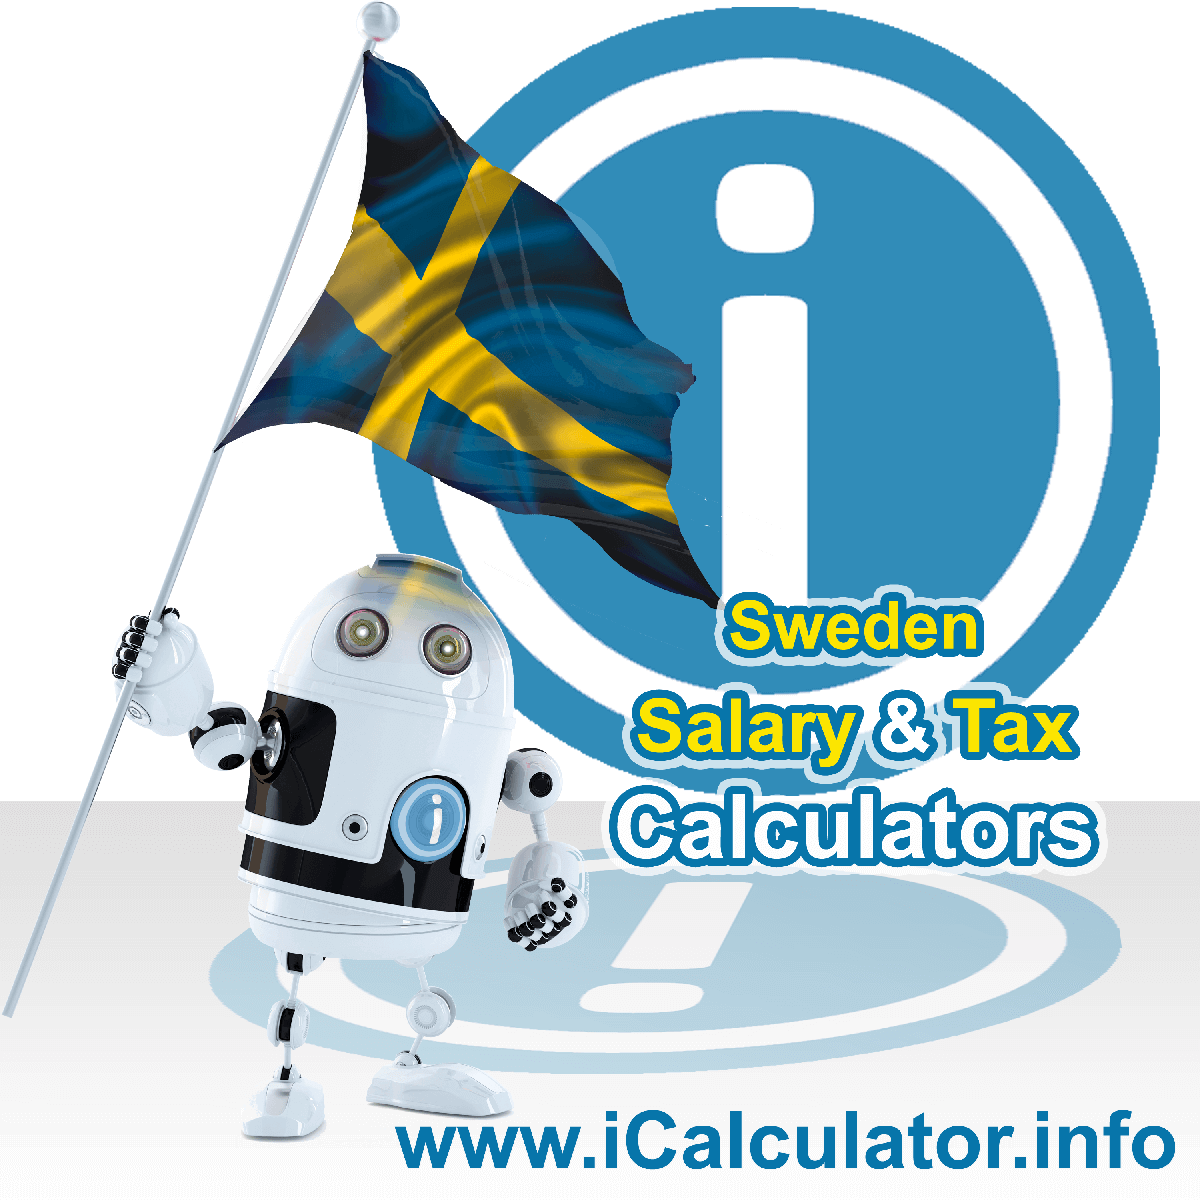 Sweden Salary Calculator. This image shows the Swedenese flag and information relating to the tax formula for the Sweden Tax Calculator